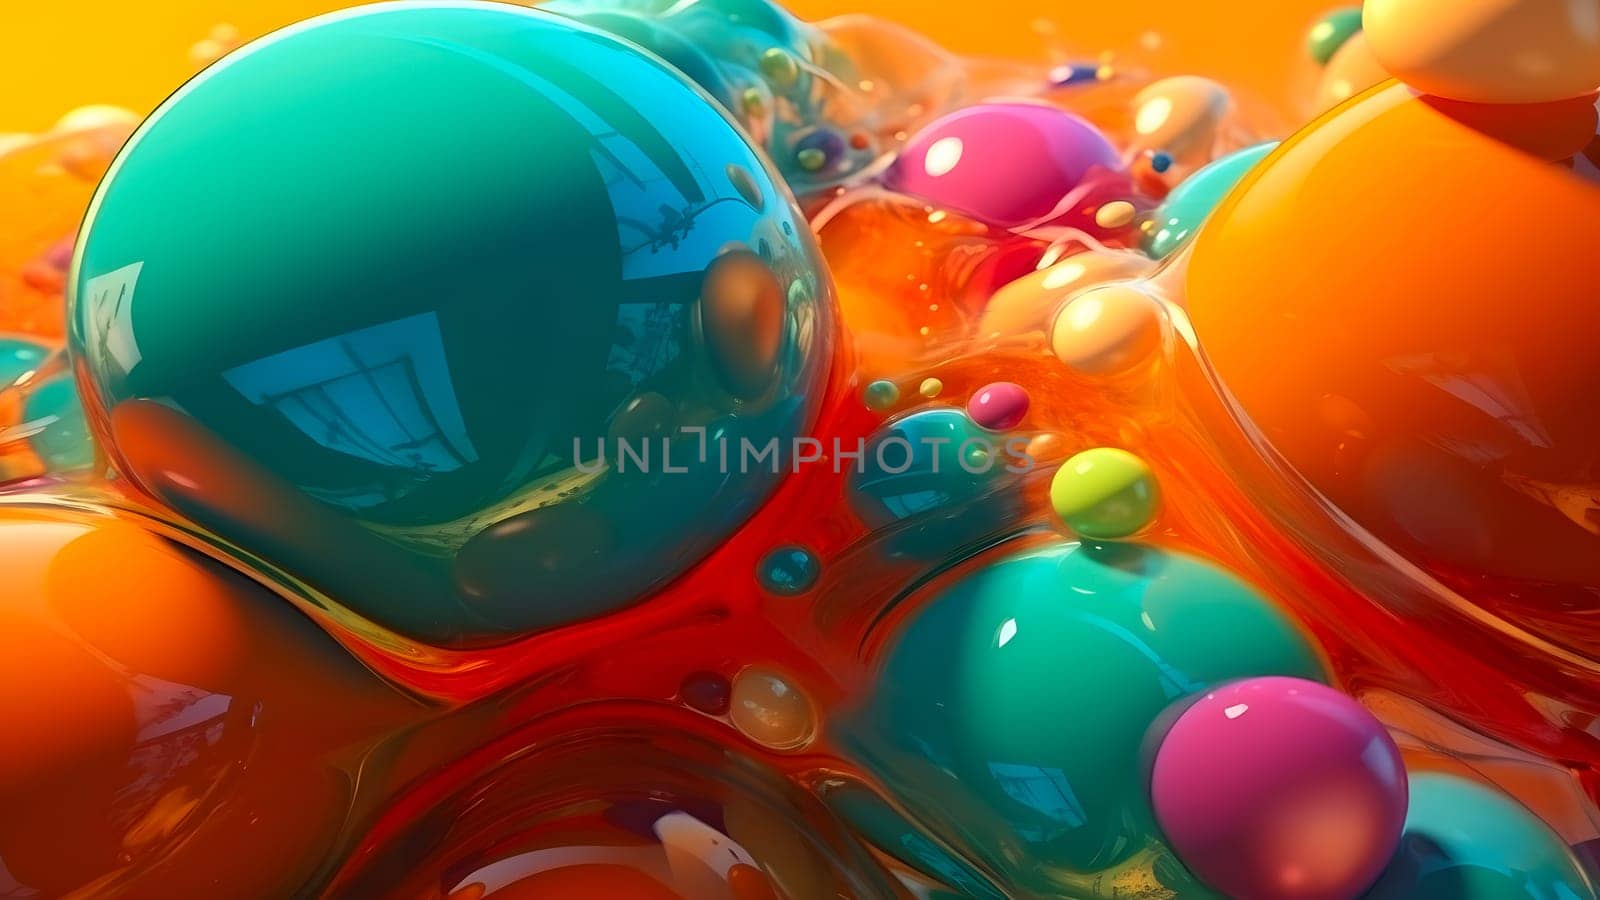 abstract background of colorful shiny gloss spheres or bubbles, neural network generated art by z1b